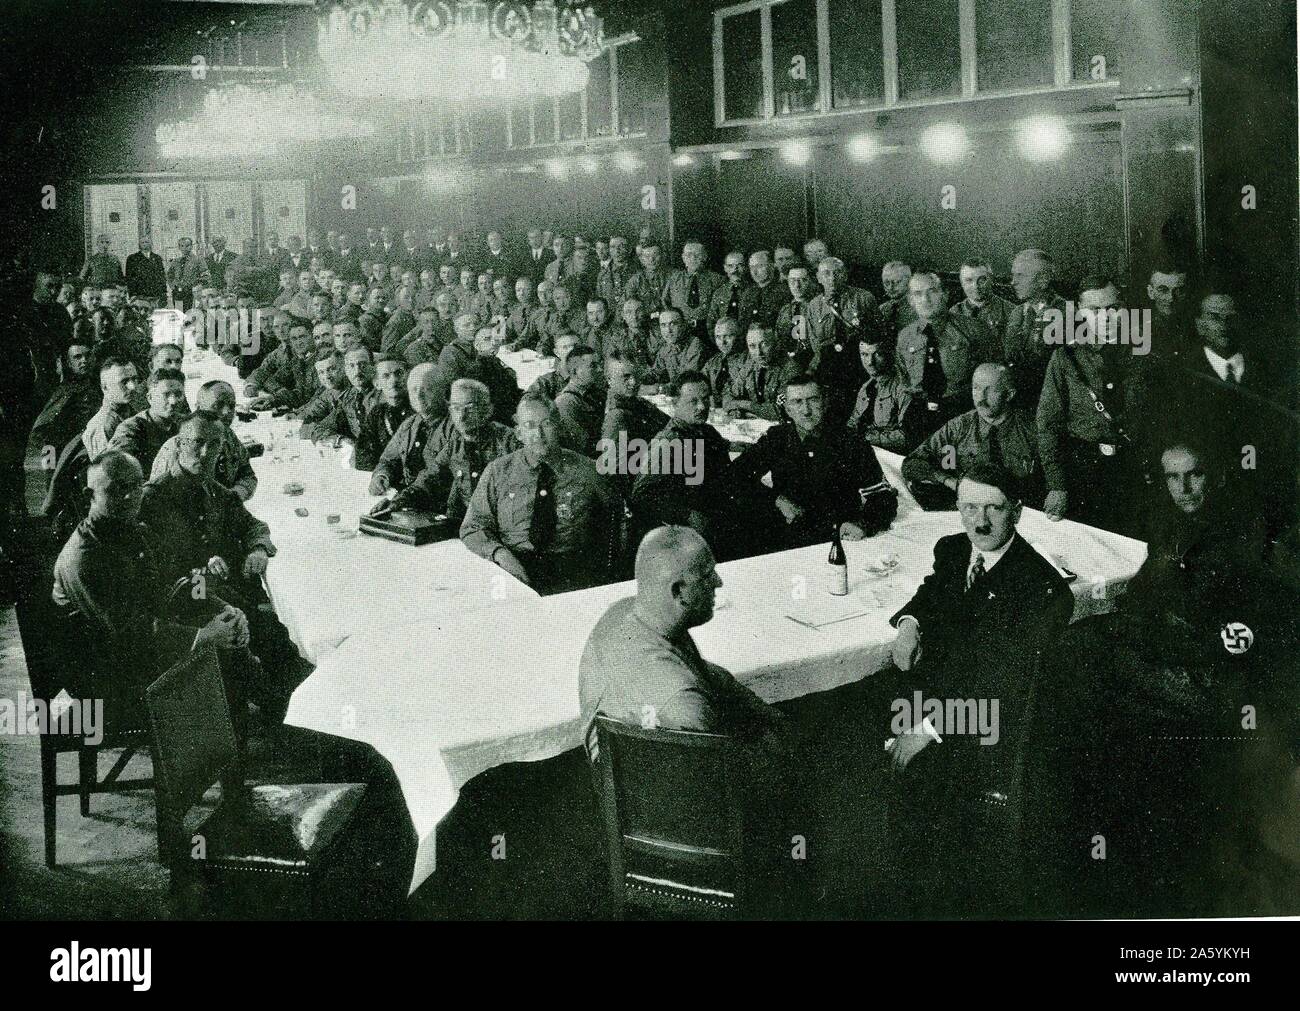 Adolph Hitler at a gathering of National Socialist Party (Nazi) members of the Reichstag, 1930s. Stock Photo